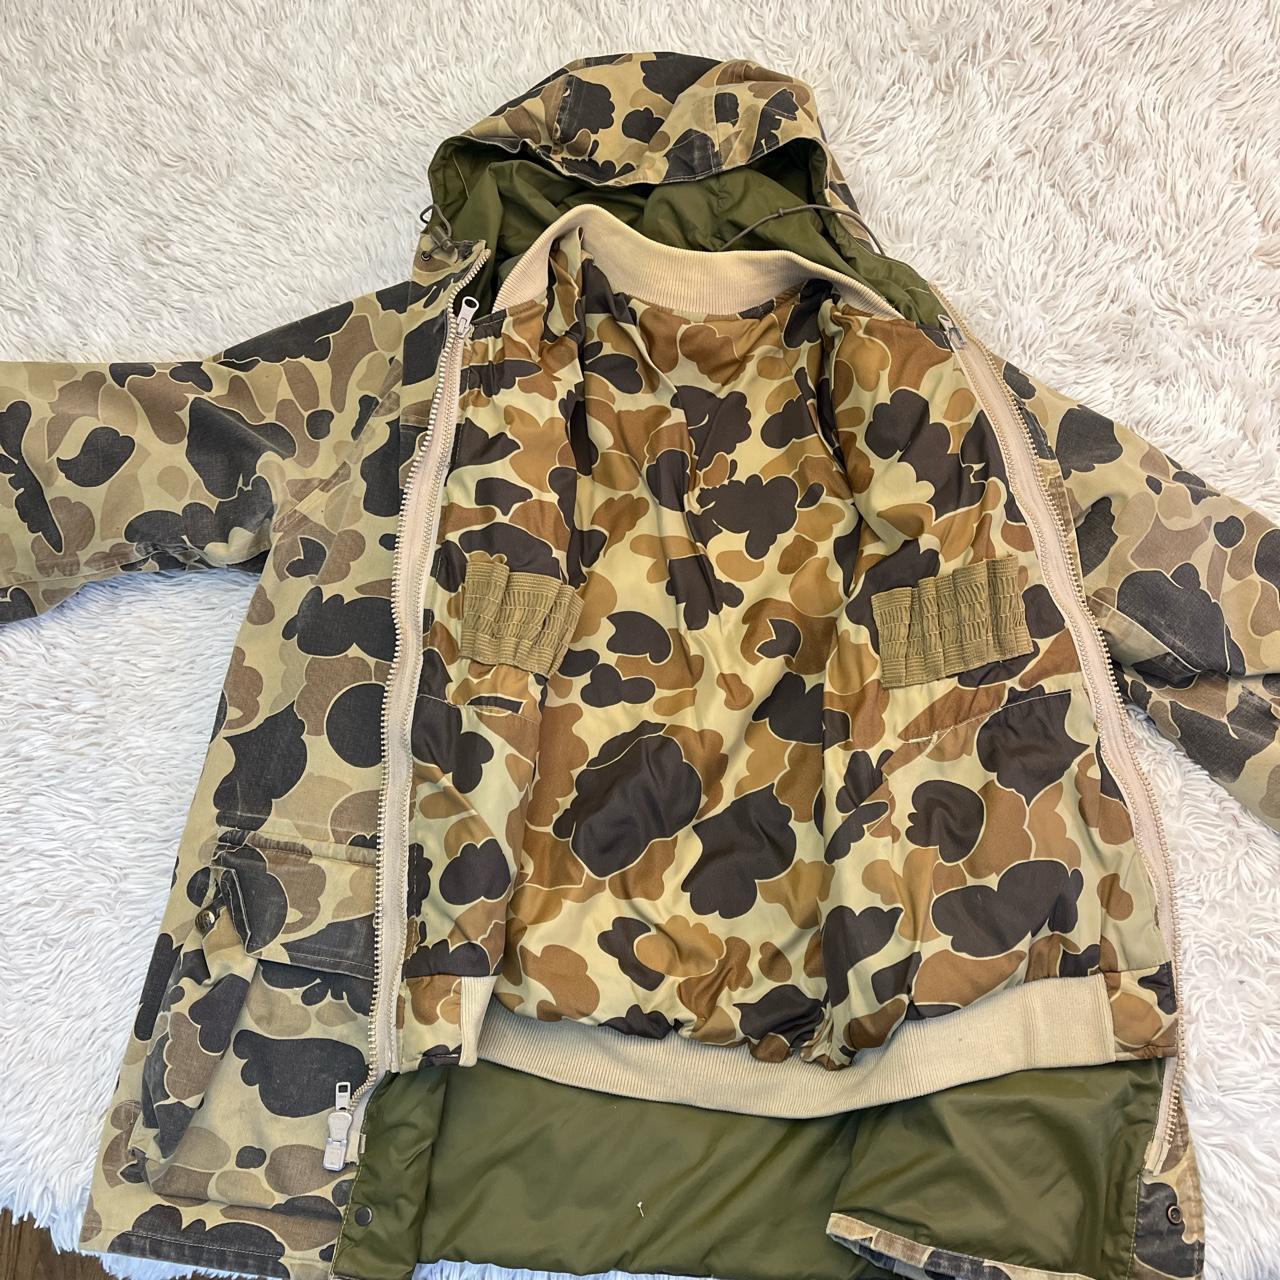 Vintage 80s Gore-Tex Columbia camouflage jacket with... - Depop